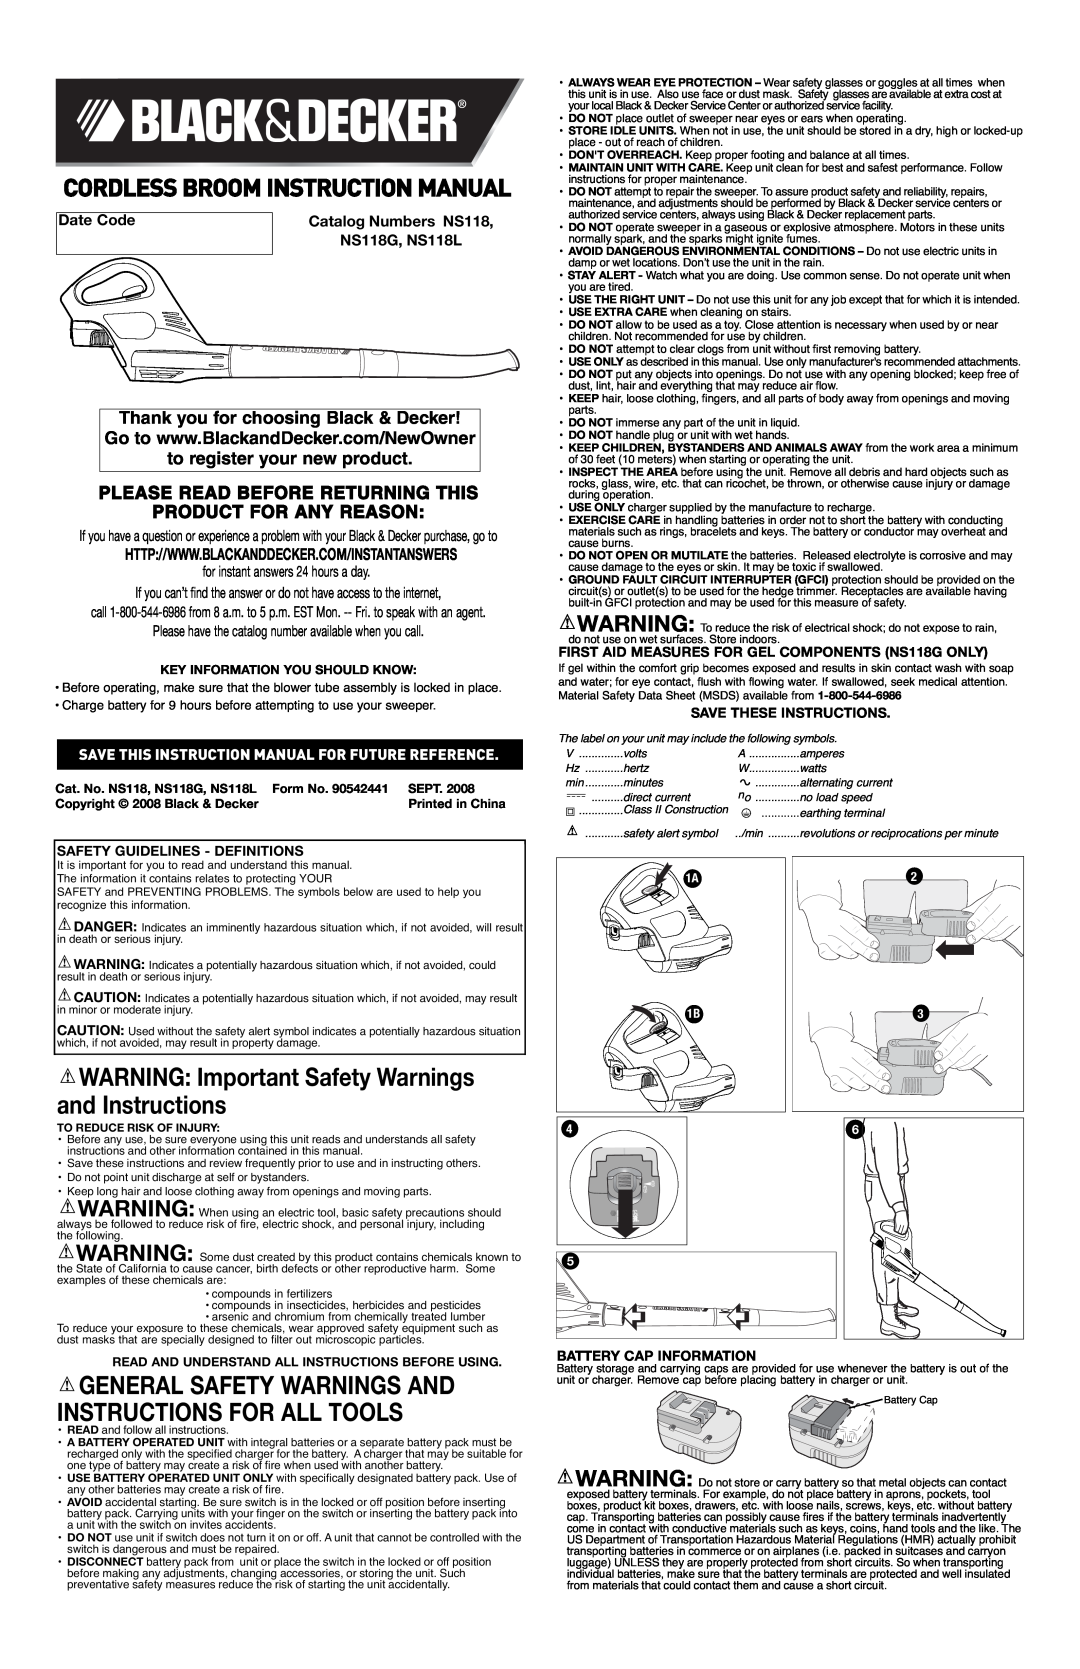 Black & Decker instruction manual Instruction Manual, Volt Sweeper, Safety Warnings And Instructions, NS118G, NS118L 